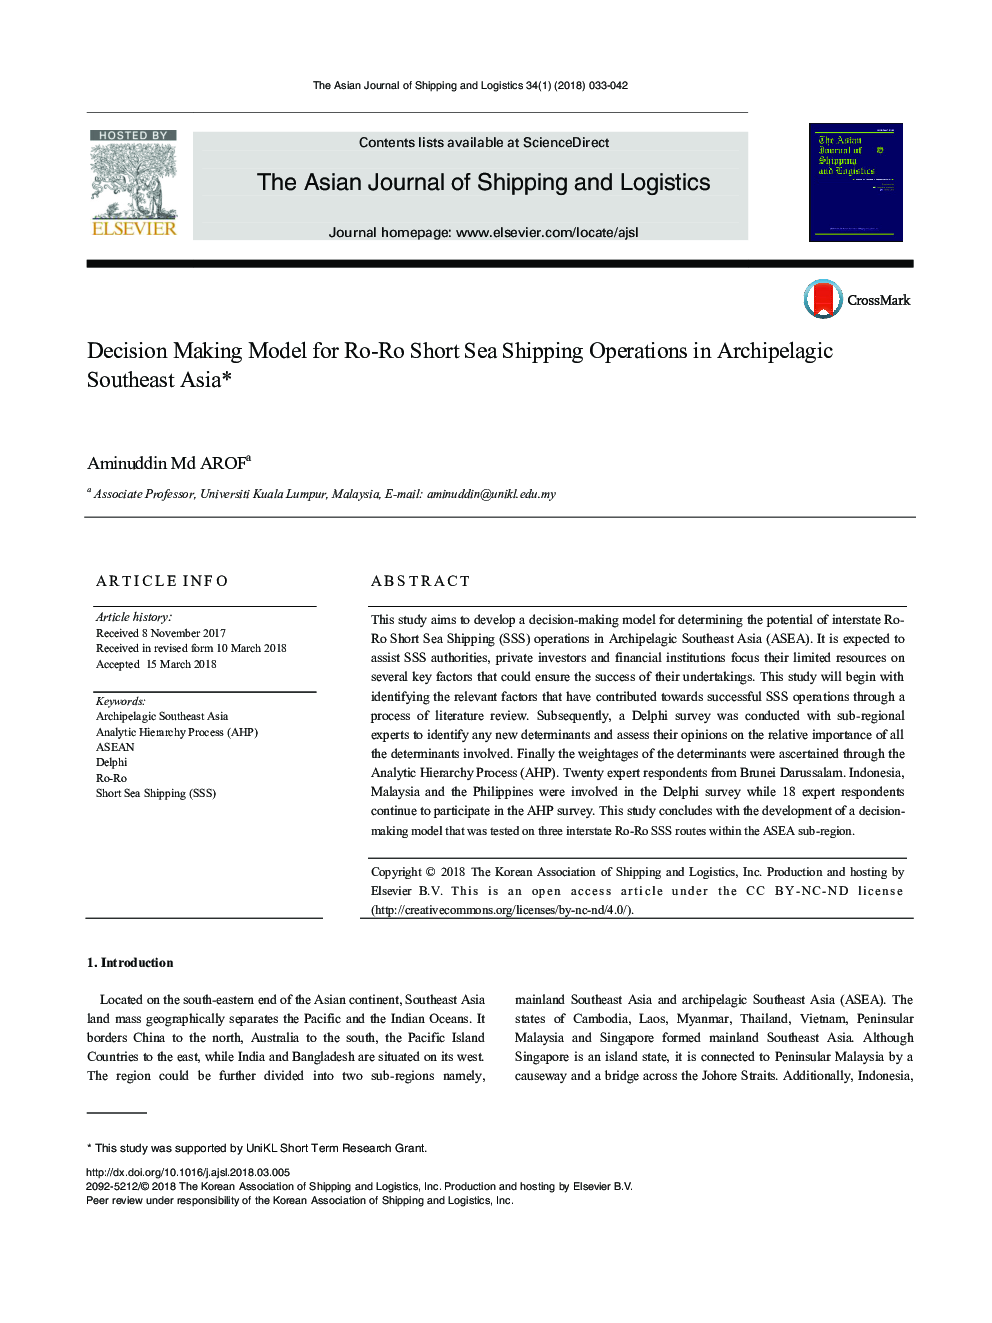 Decision Making Model for Ro-Ro Short Sea Shipping Operations in Archipelagic Southeast Asia